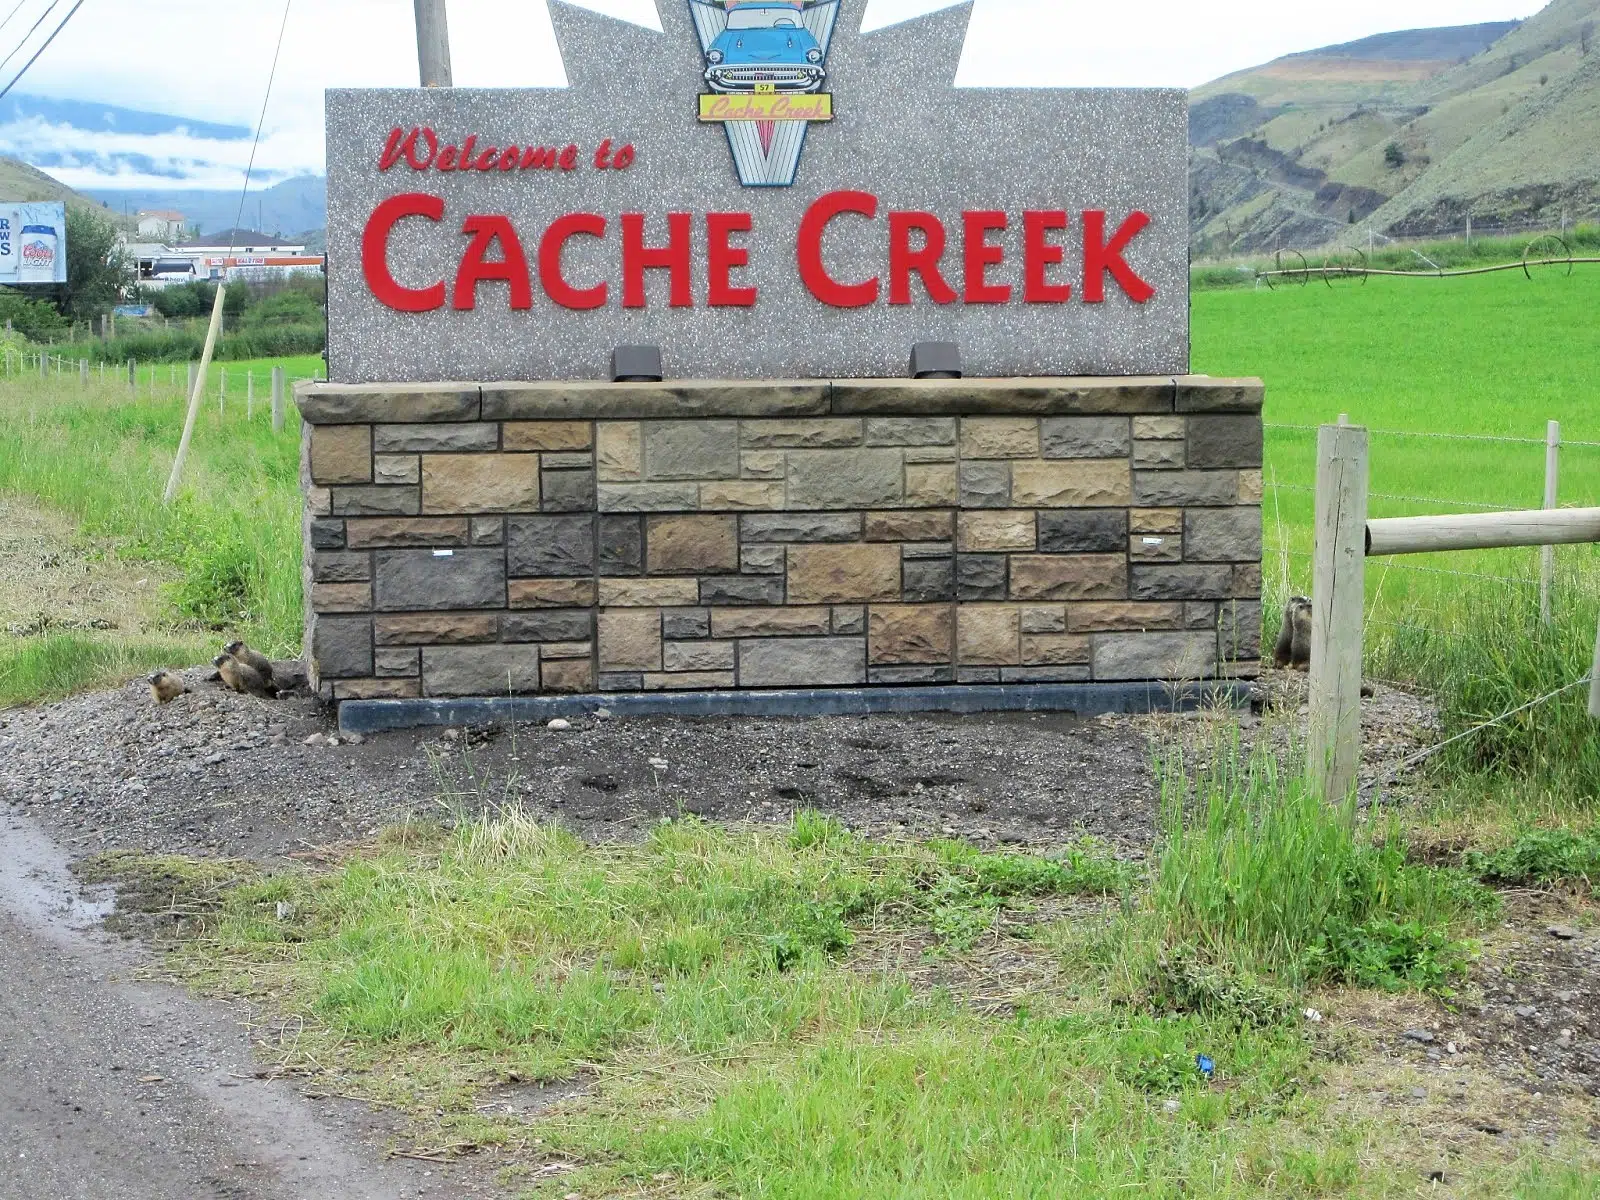 Another increase coming to bus service in Cache Creek area